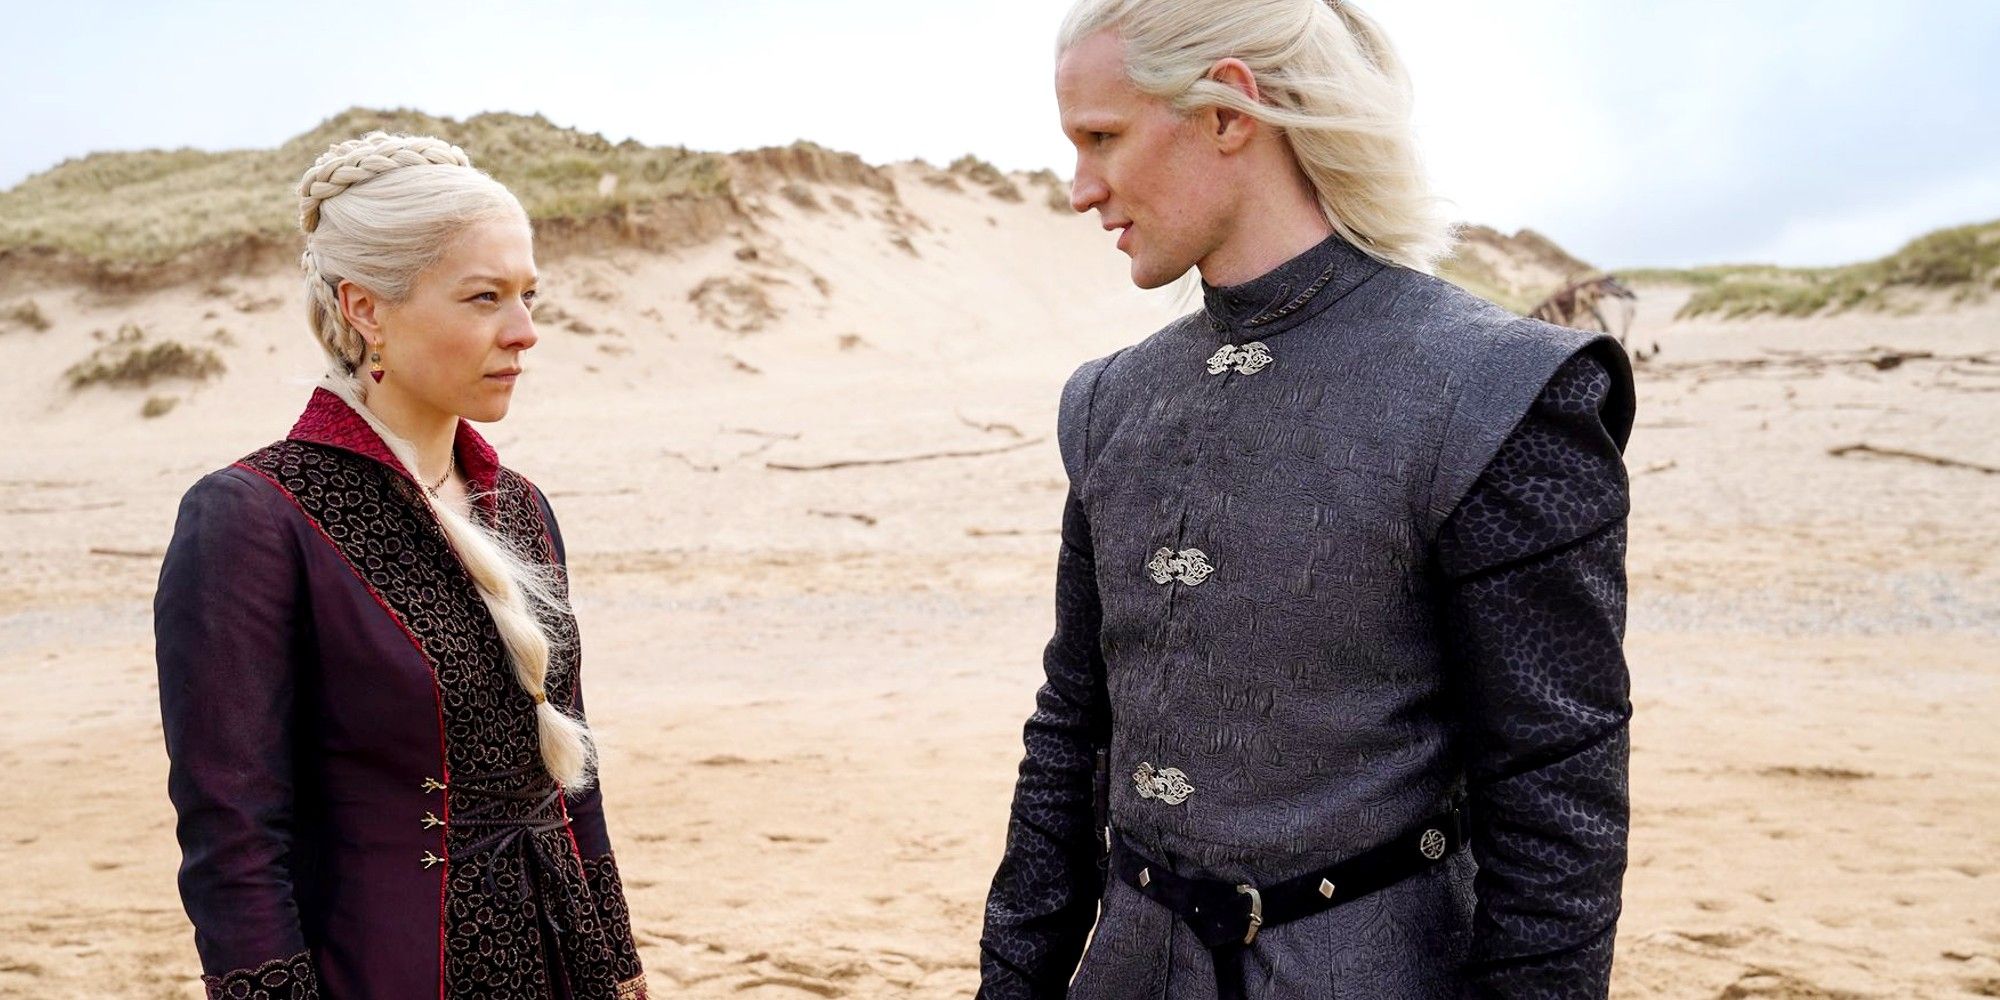 Who Is Rhaenyra Targaryen? House Of The Dragon Character Explained